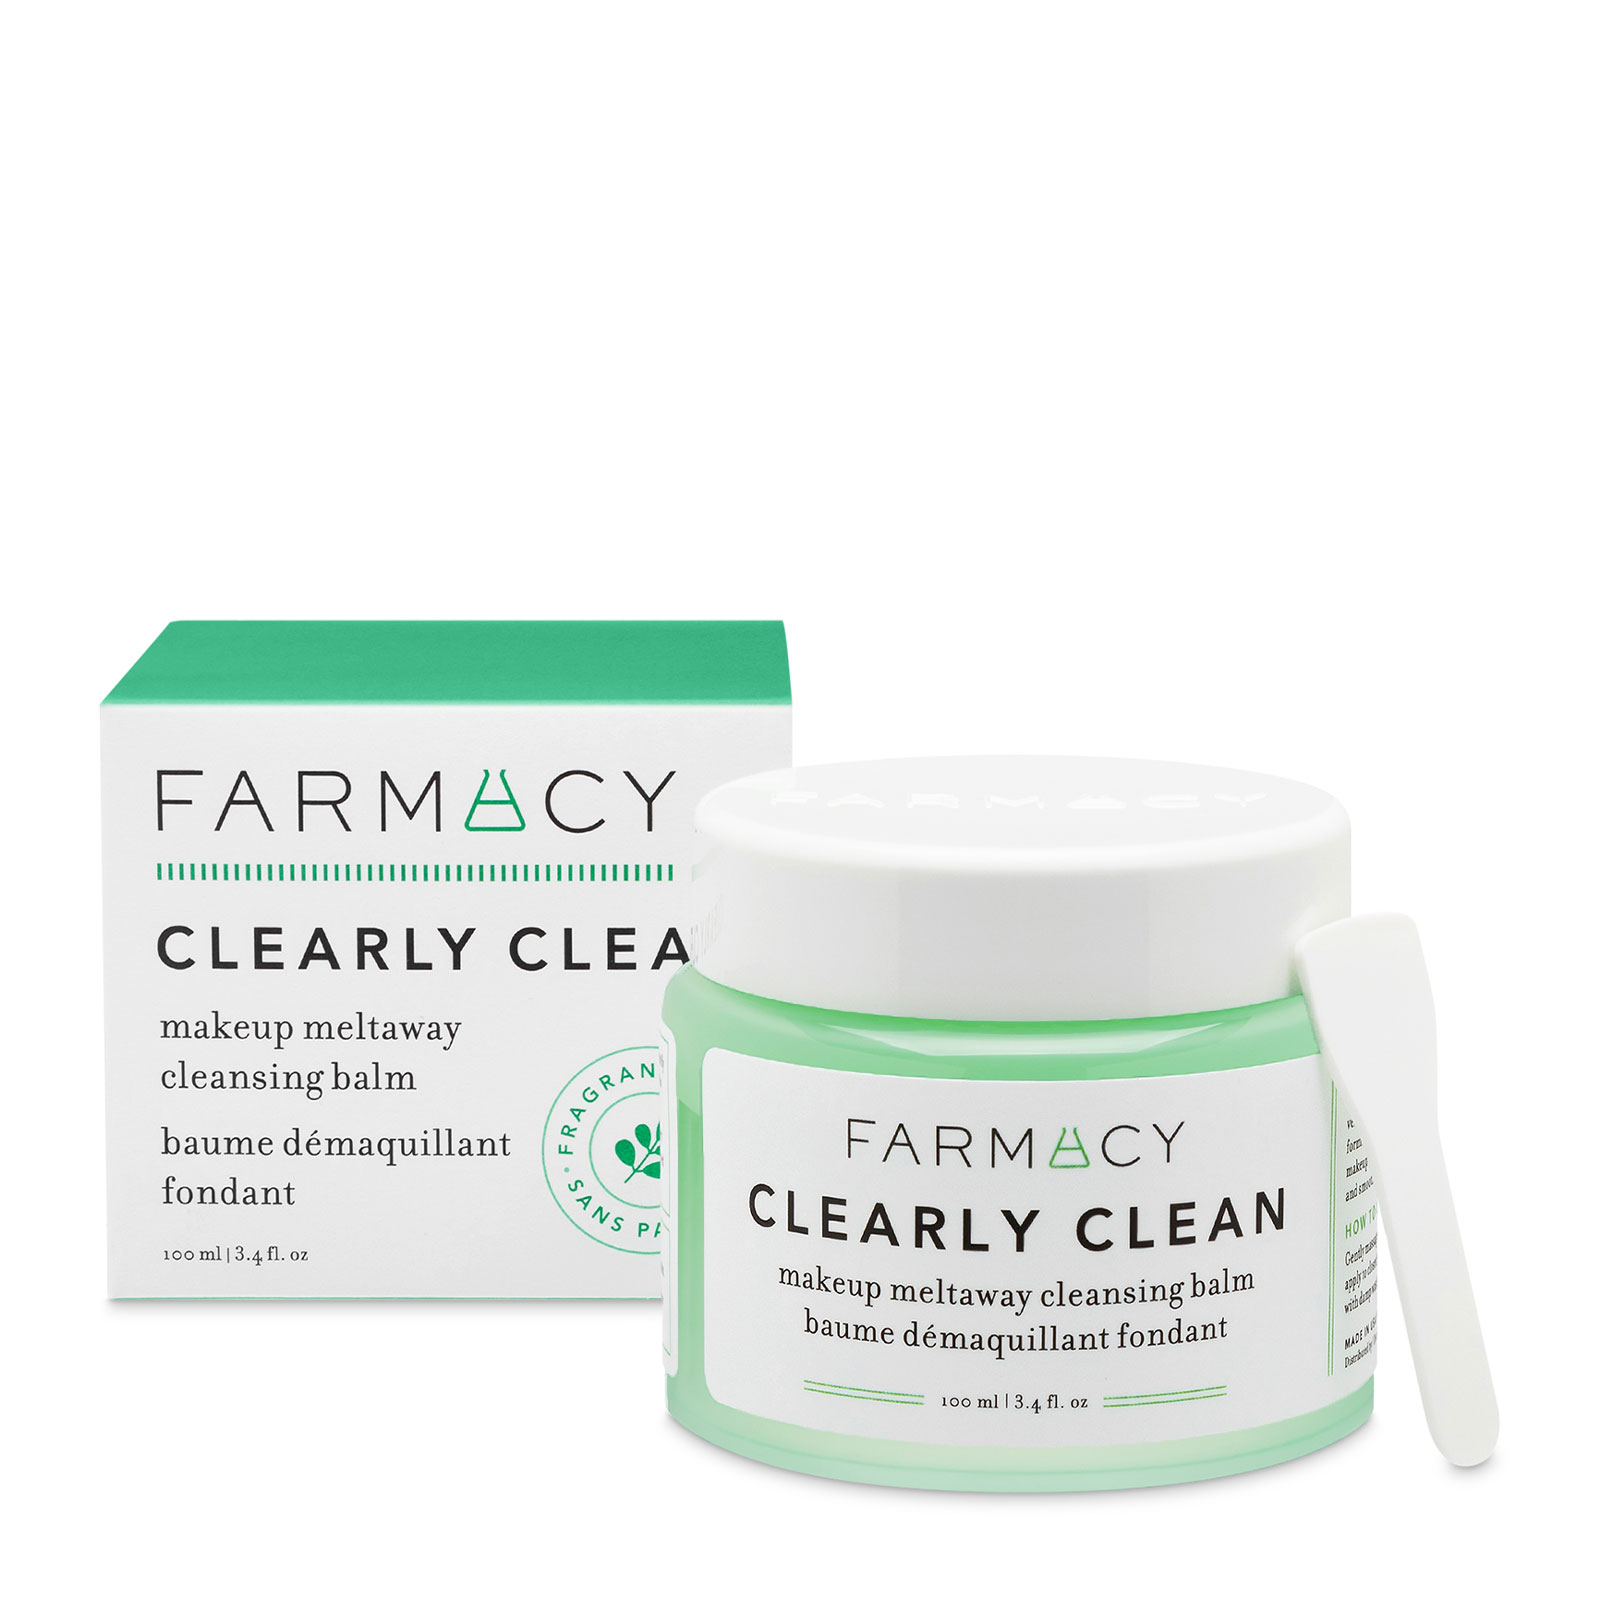 Farmacy Beauty Clearly Clean Makeup Meltaway Cleansing Balm 100ml